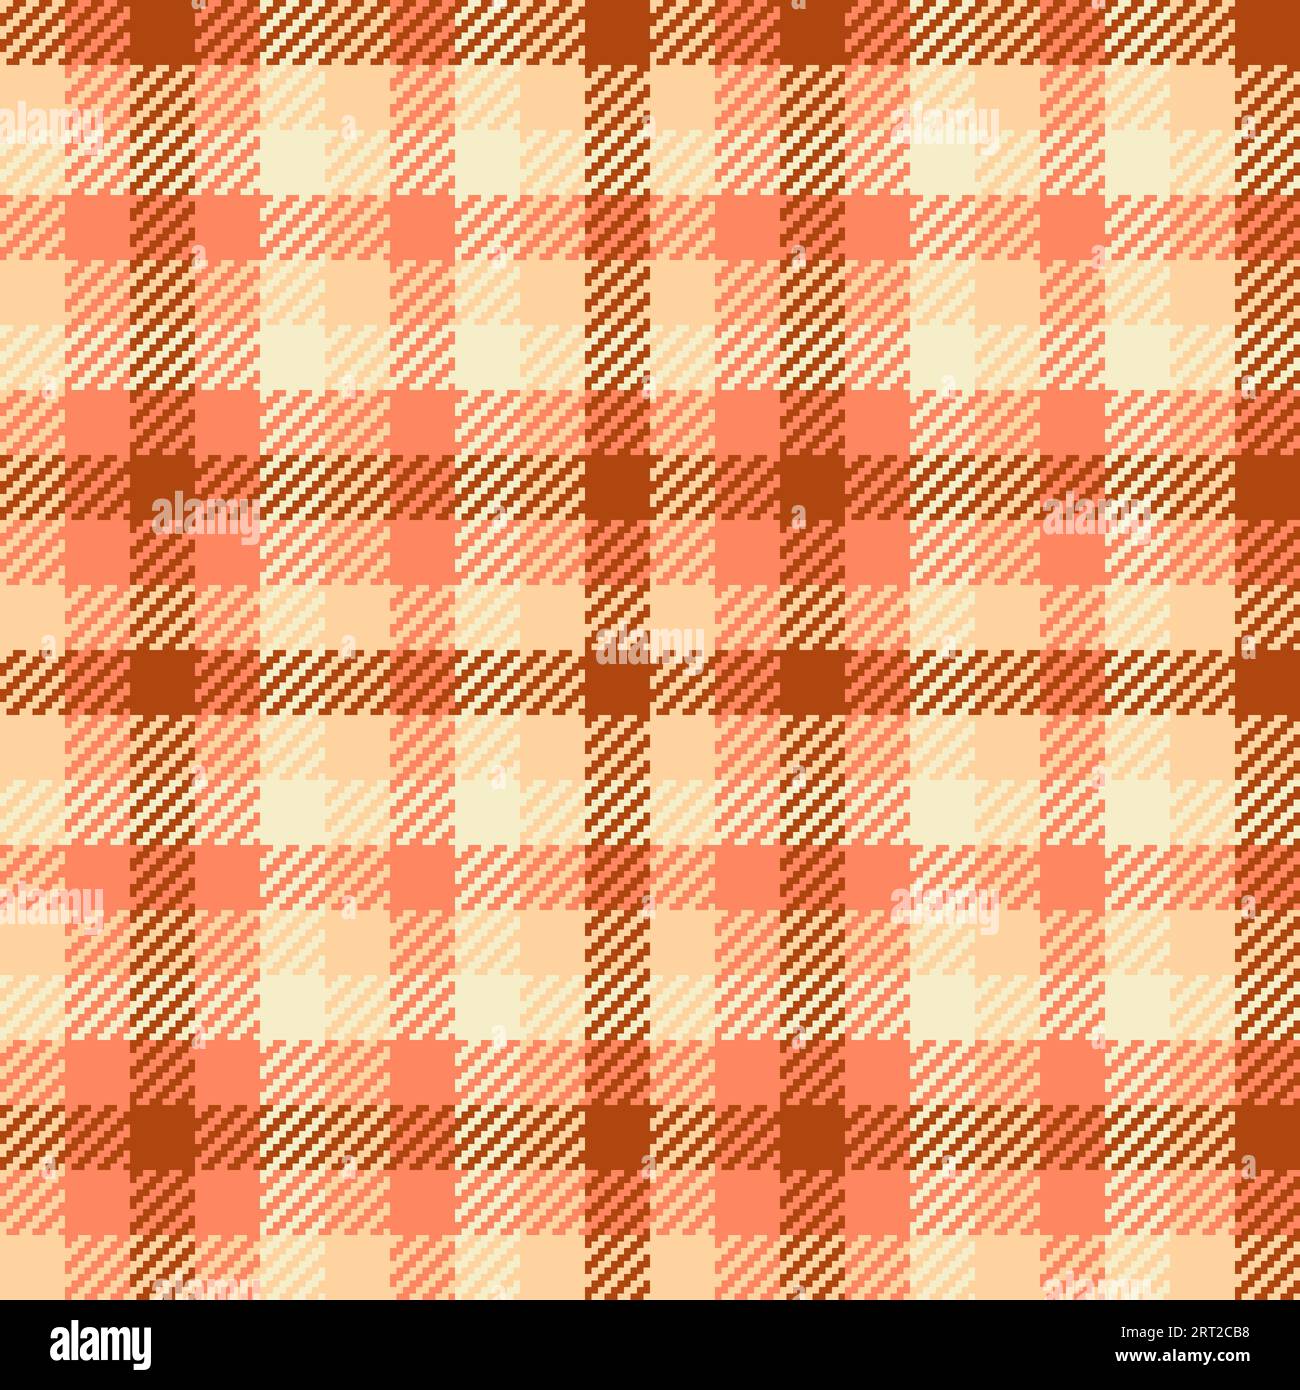 Textile check tartan of vector seamless texture with a fabric pattern plaid background in orange and red colors. Stock Vector